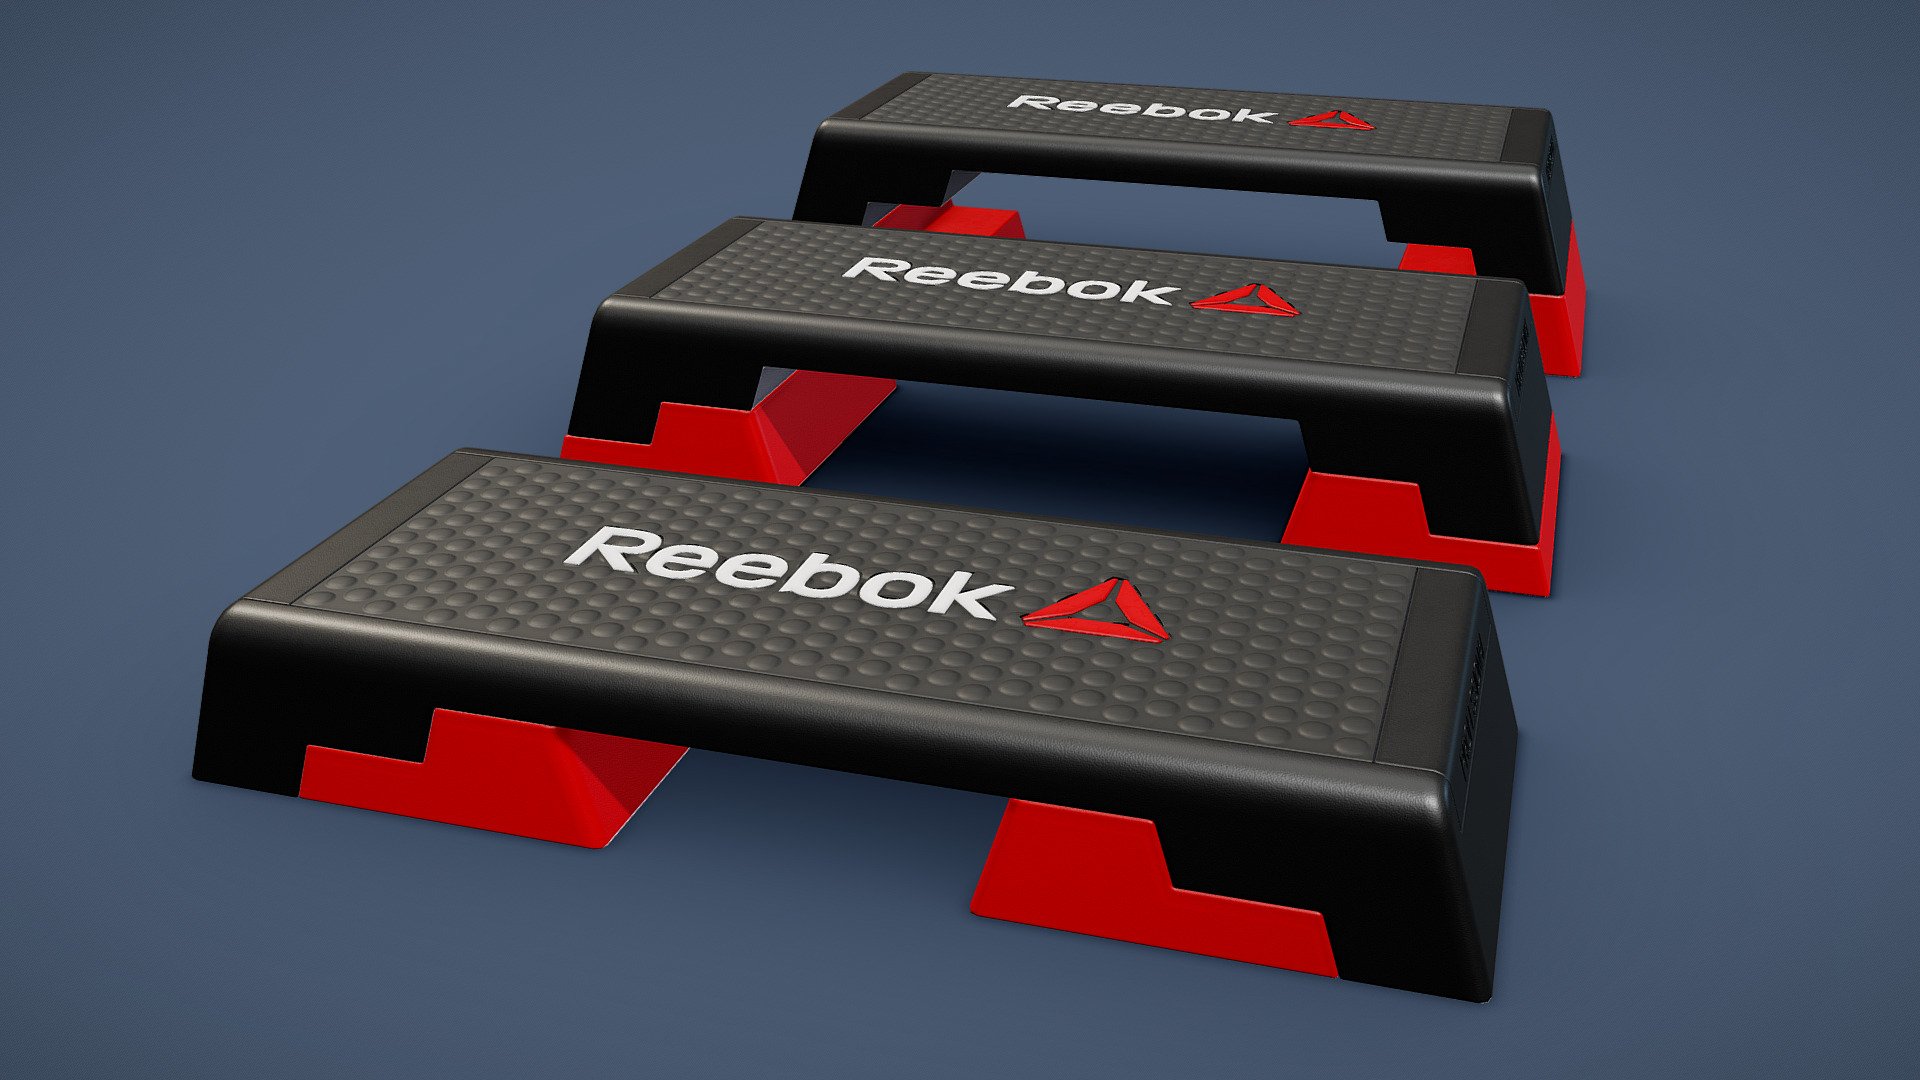 3D model of Reebok aerobic stepper. 4K textures, PBR material.

Please note that in Sketchfab preview textures have lower resolution and are heavily compressed. You will get full quality uncompressed textures upon purchase 3d model